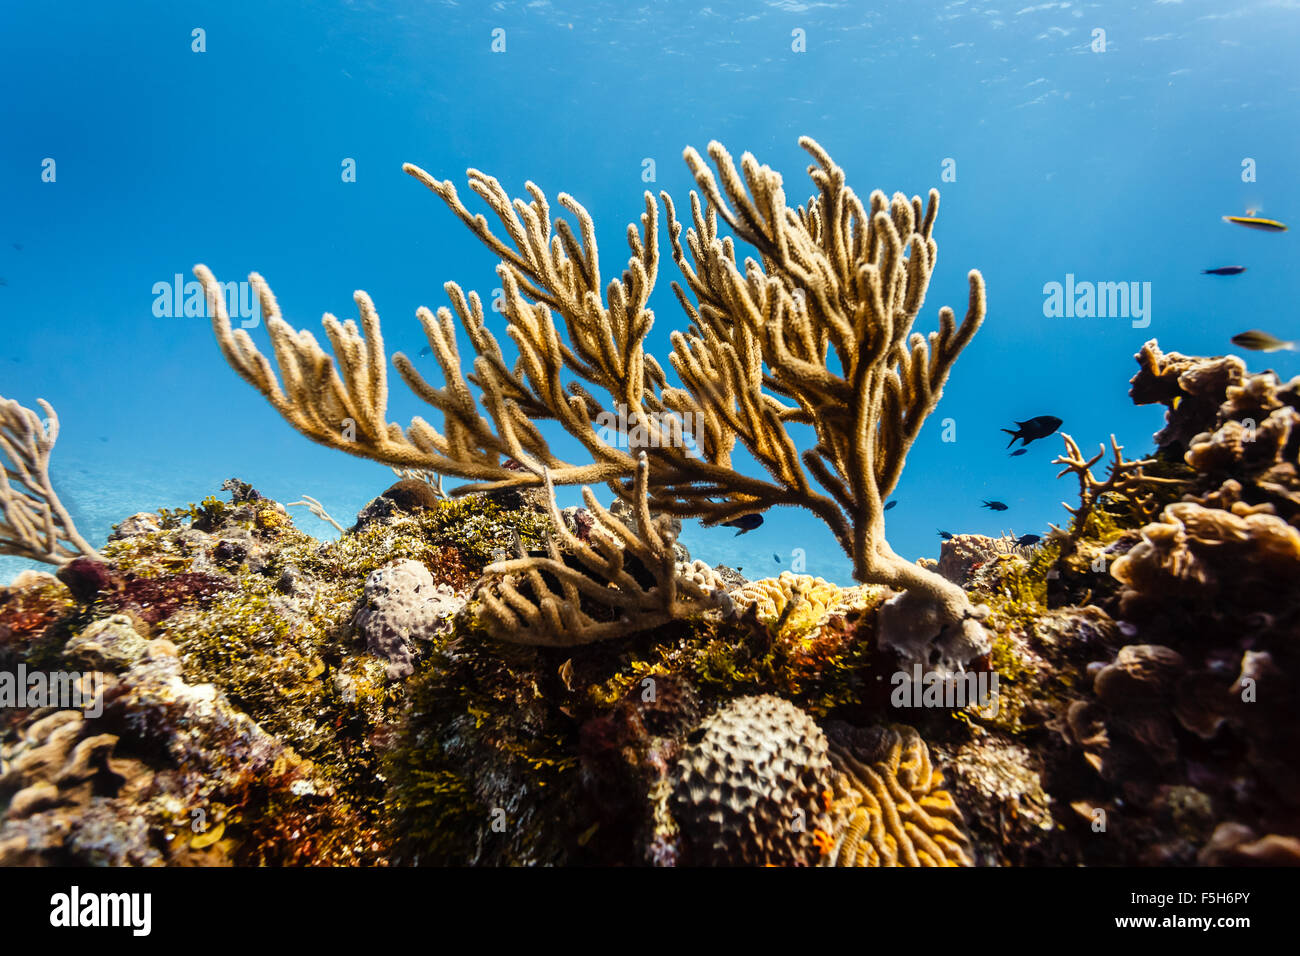 Close-up of branch corals silhouetted against blue ocean on ridge of tropical reef with brain corals below Stock Photo